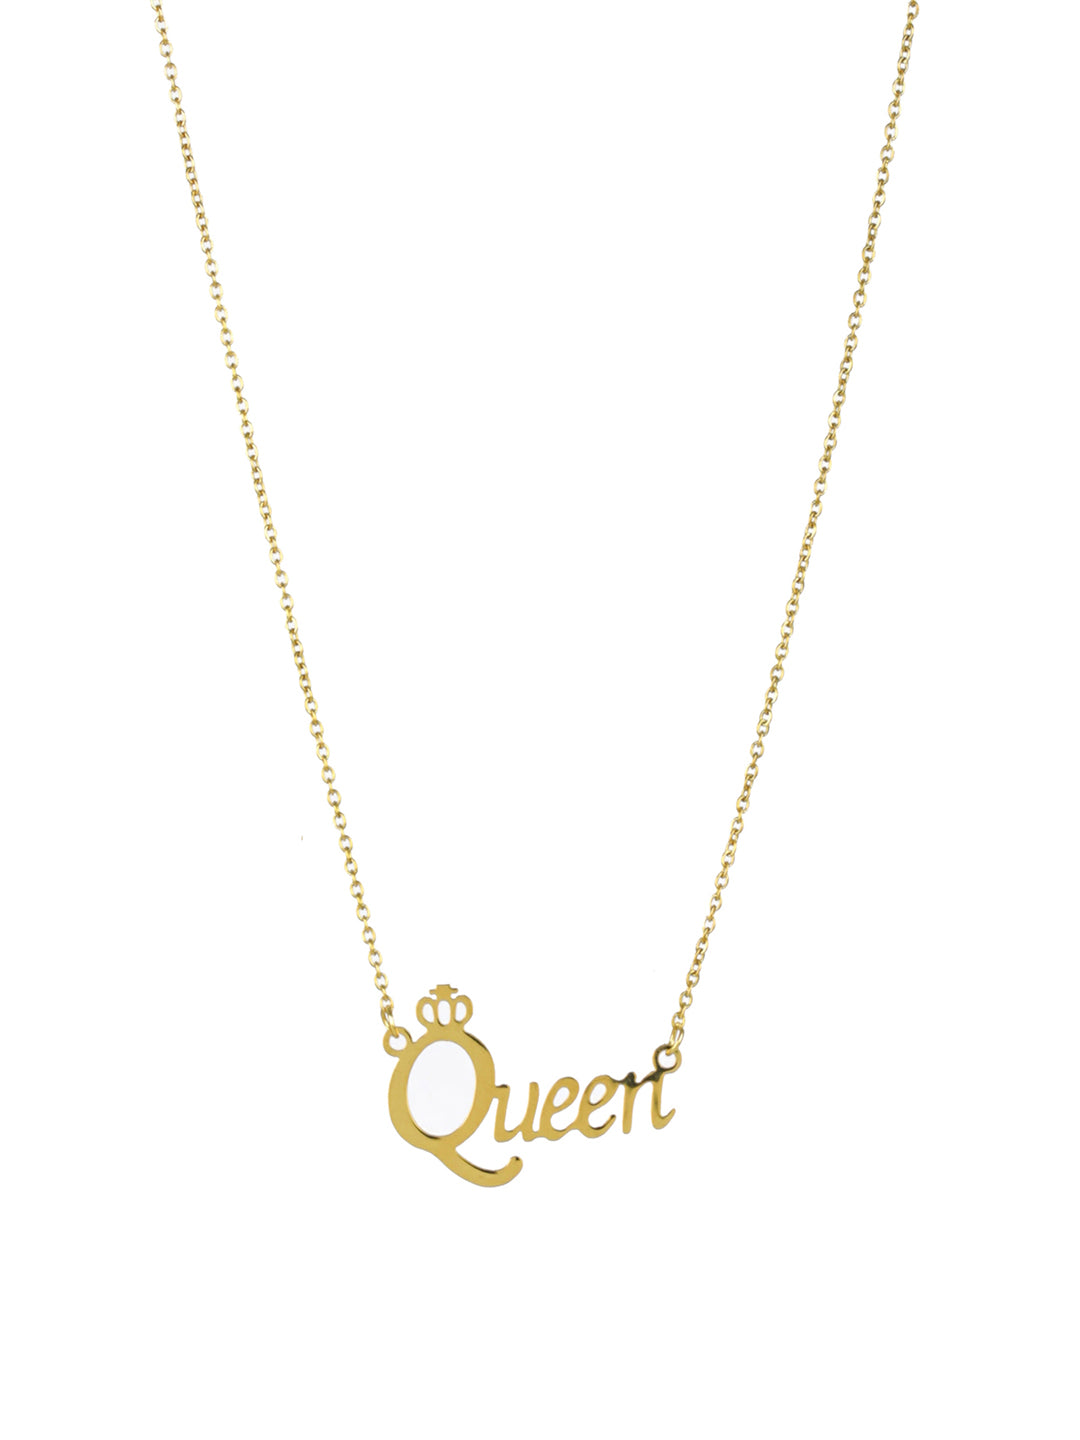 Priyaasi Elegant Queen Gold-Plated Necklace